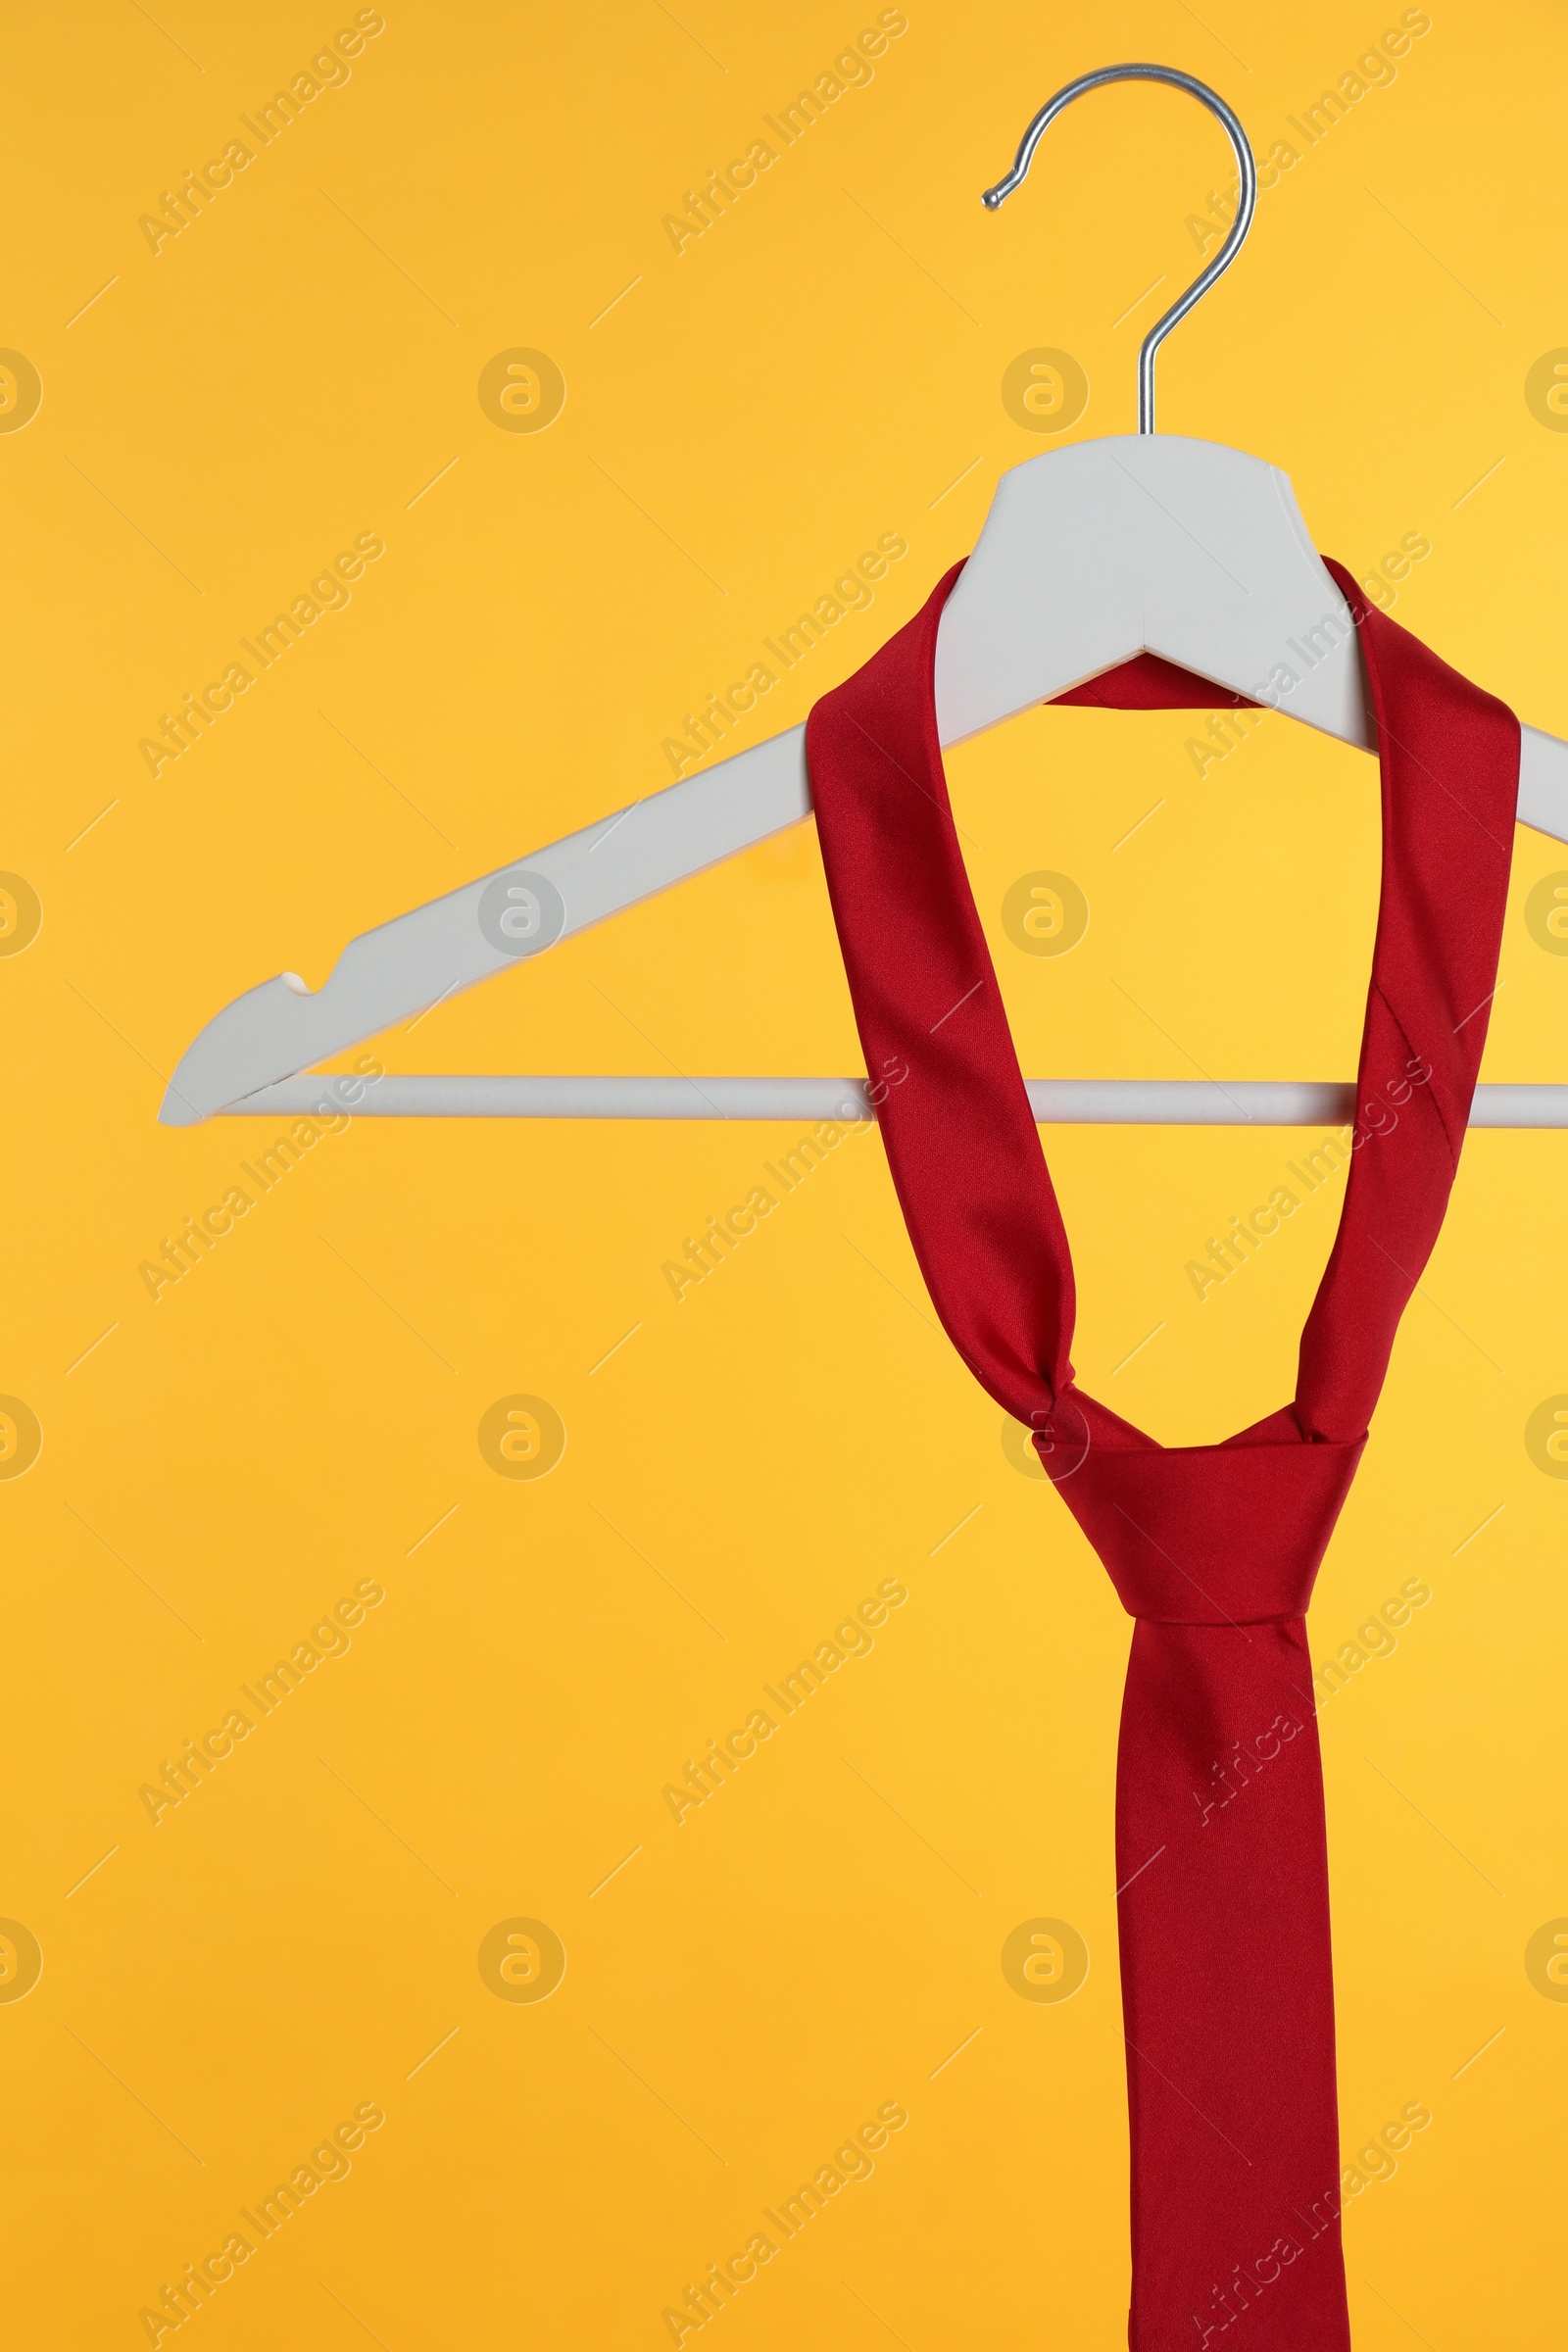 Photo of Hanger with red tie against orange background